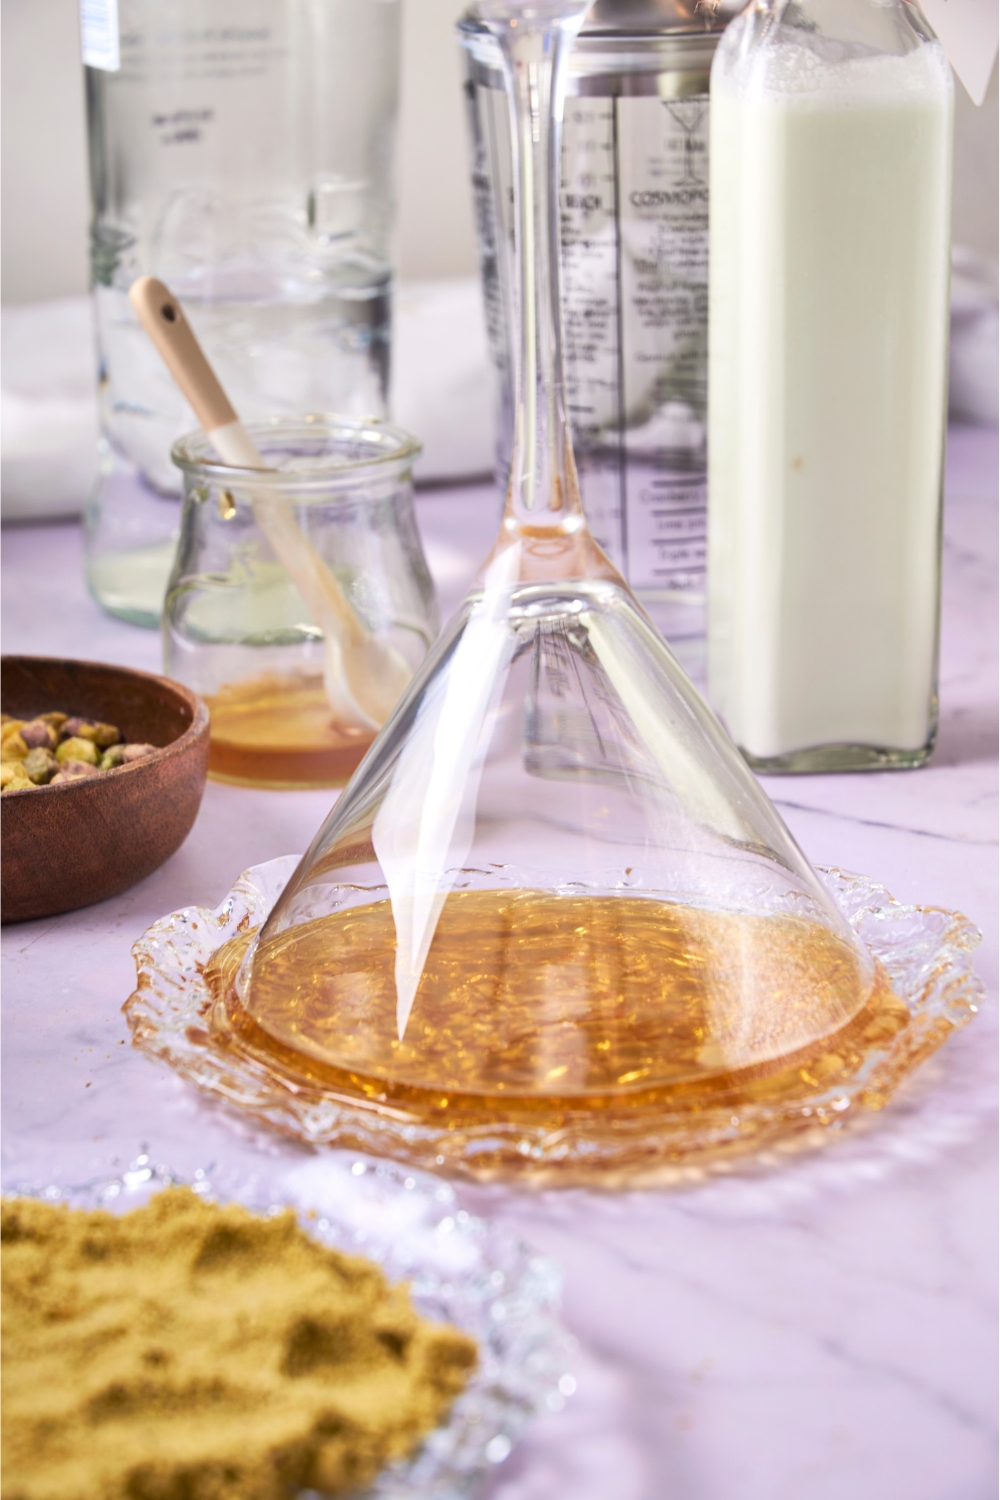 A martini glass being dipped into the honey.